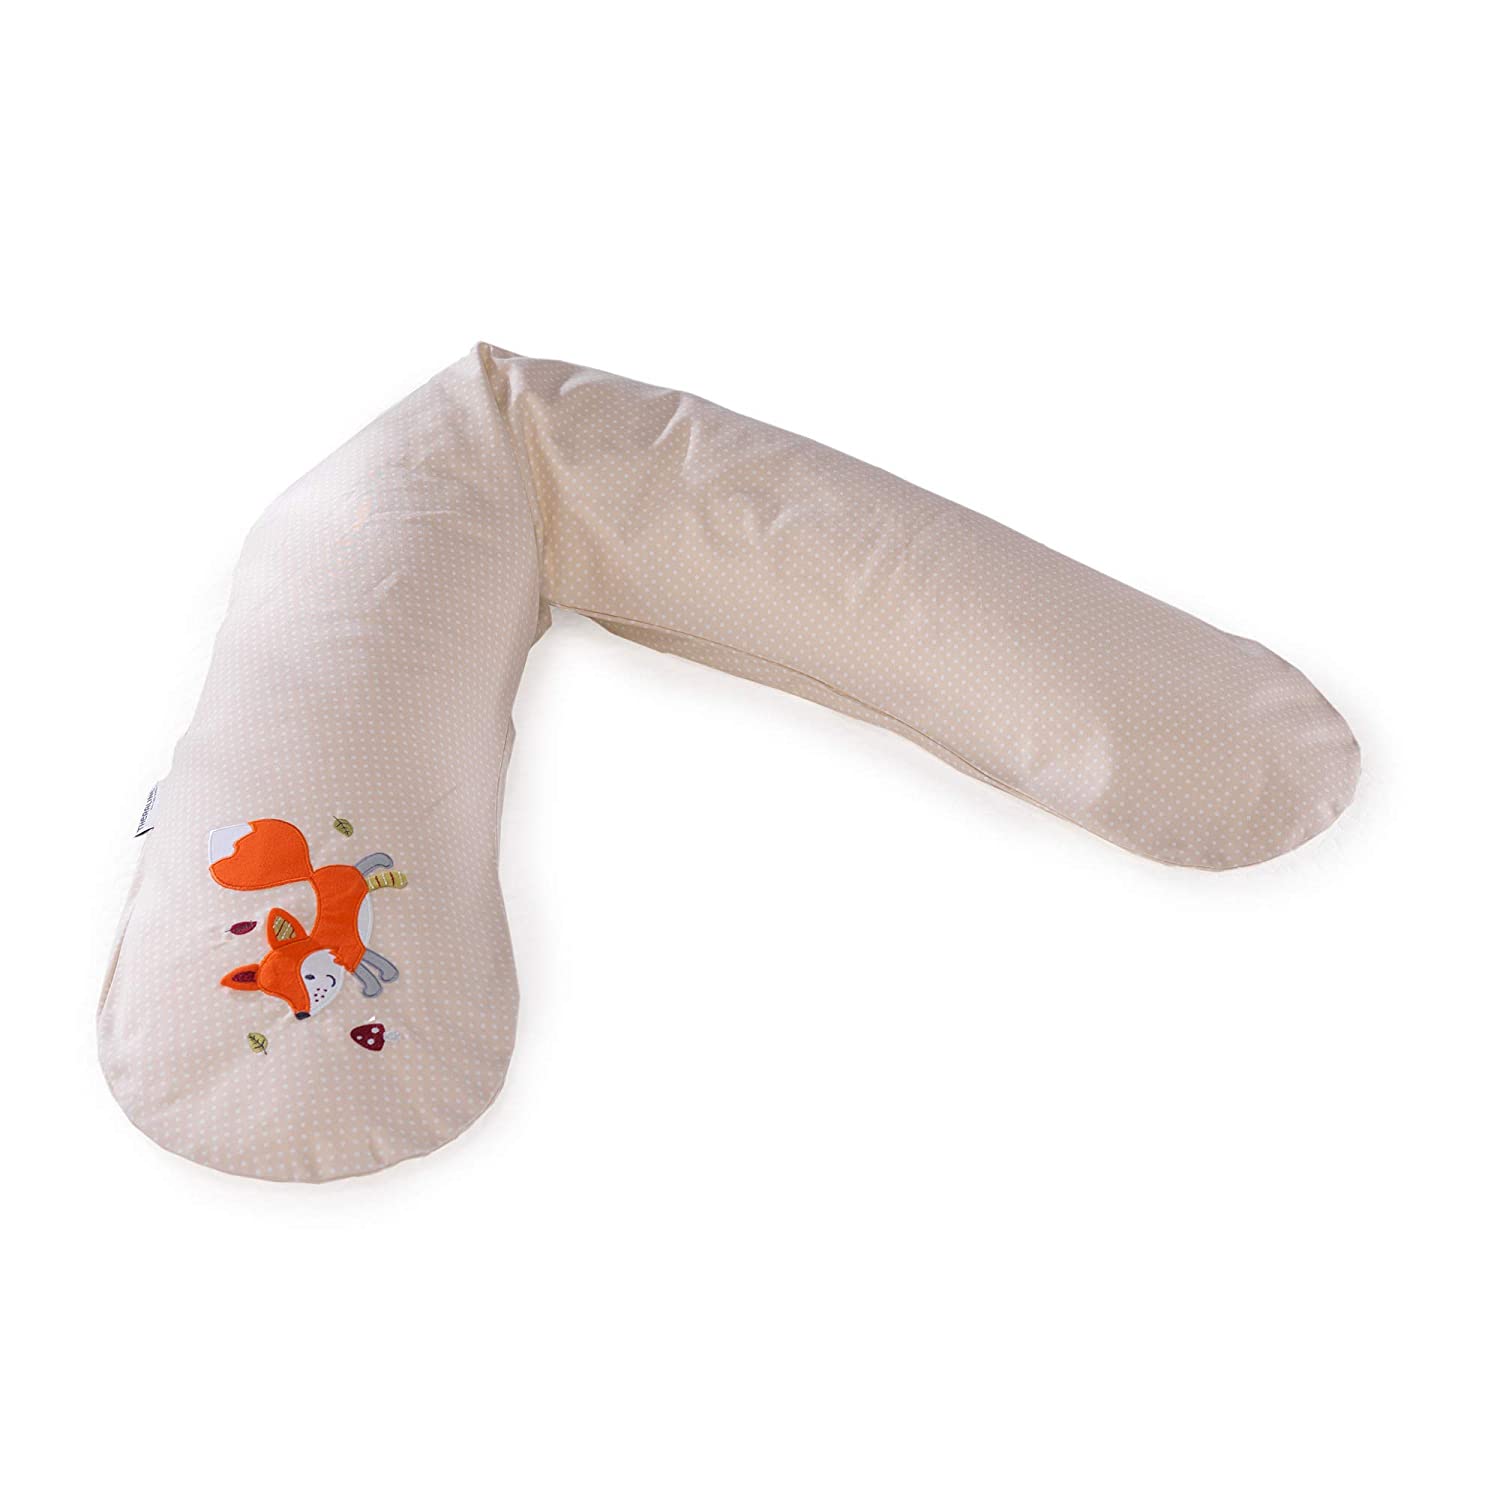 Theraline Original Pregnancy And Breastfeeding Pillow, Filled With Sand-Lik